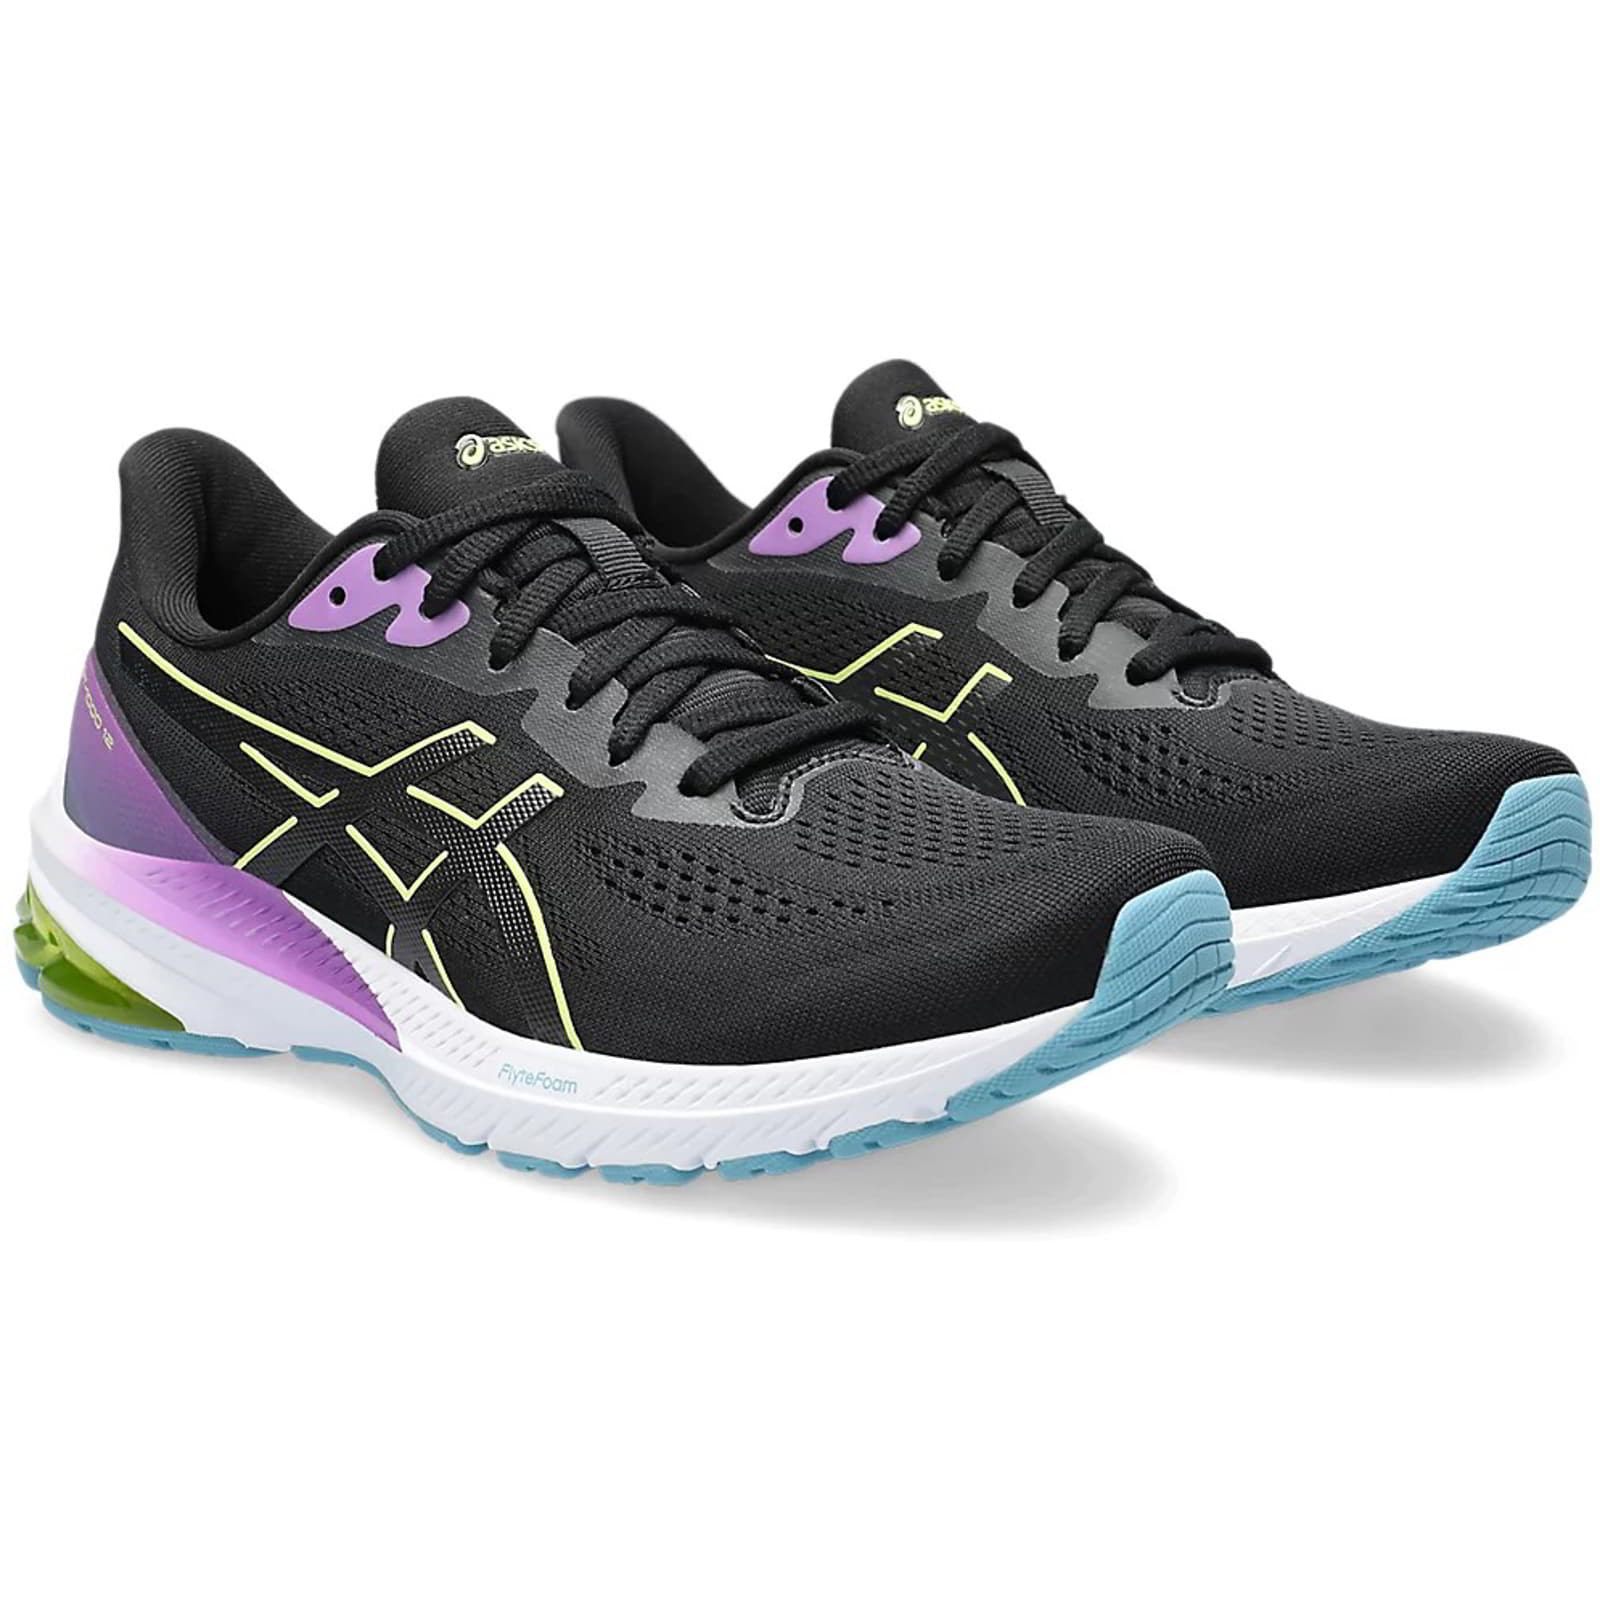 Asics Women's GT-1000 12 Running Shoes Trainers - UK 6